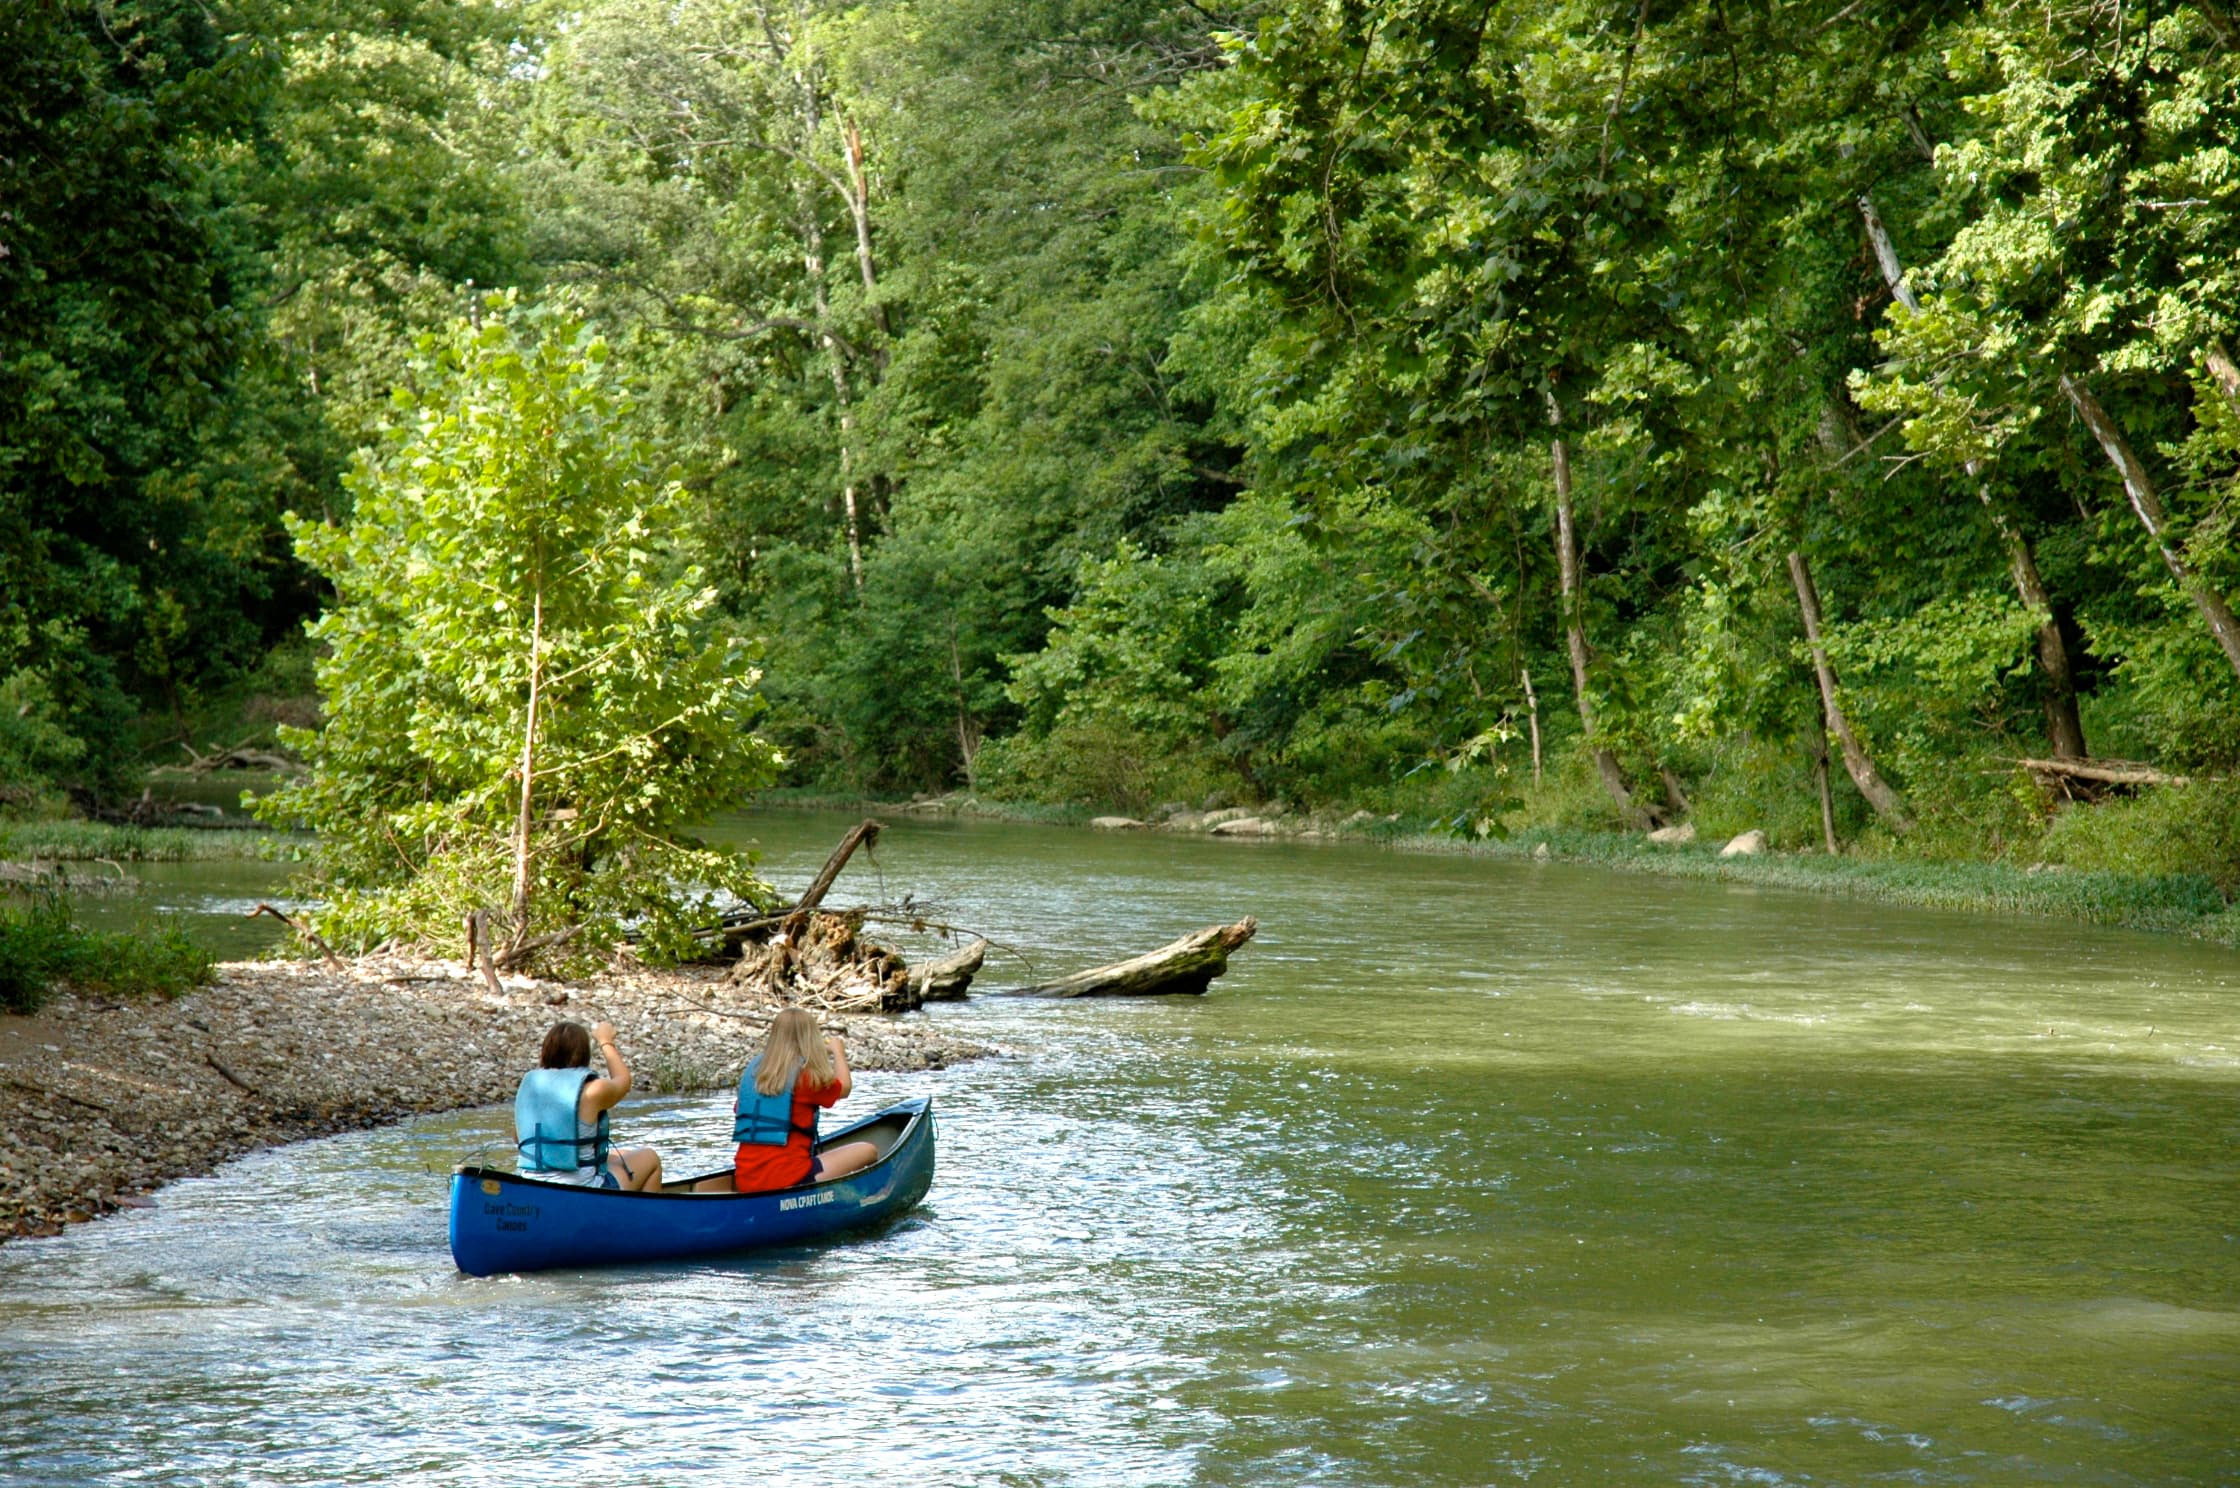 Two canoers enjoy their trip down the beautiful Blue River